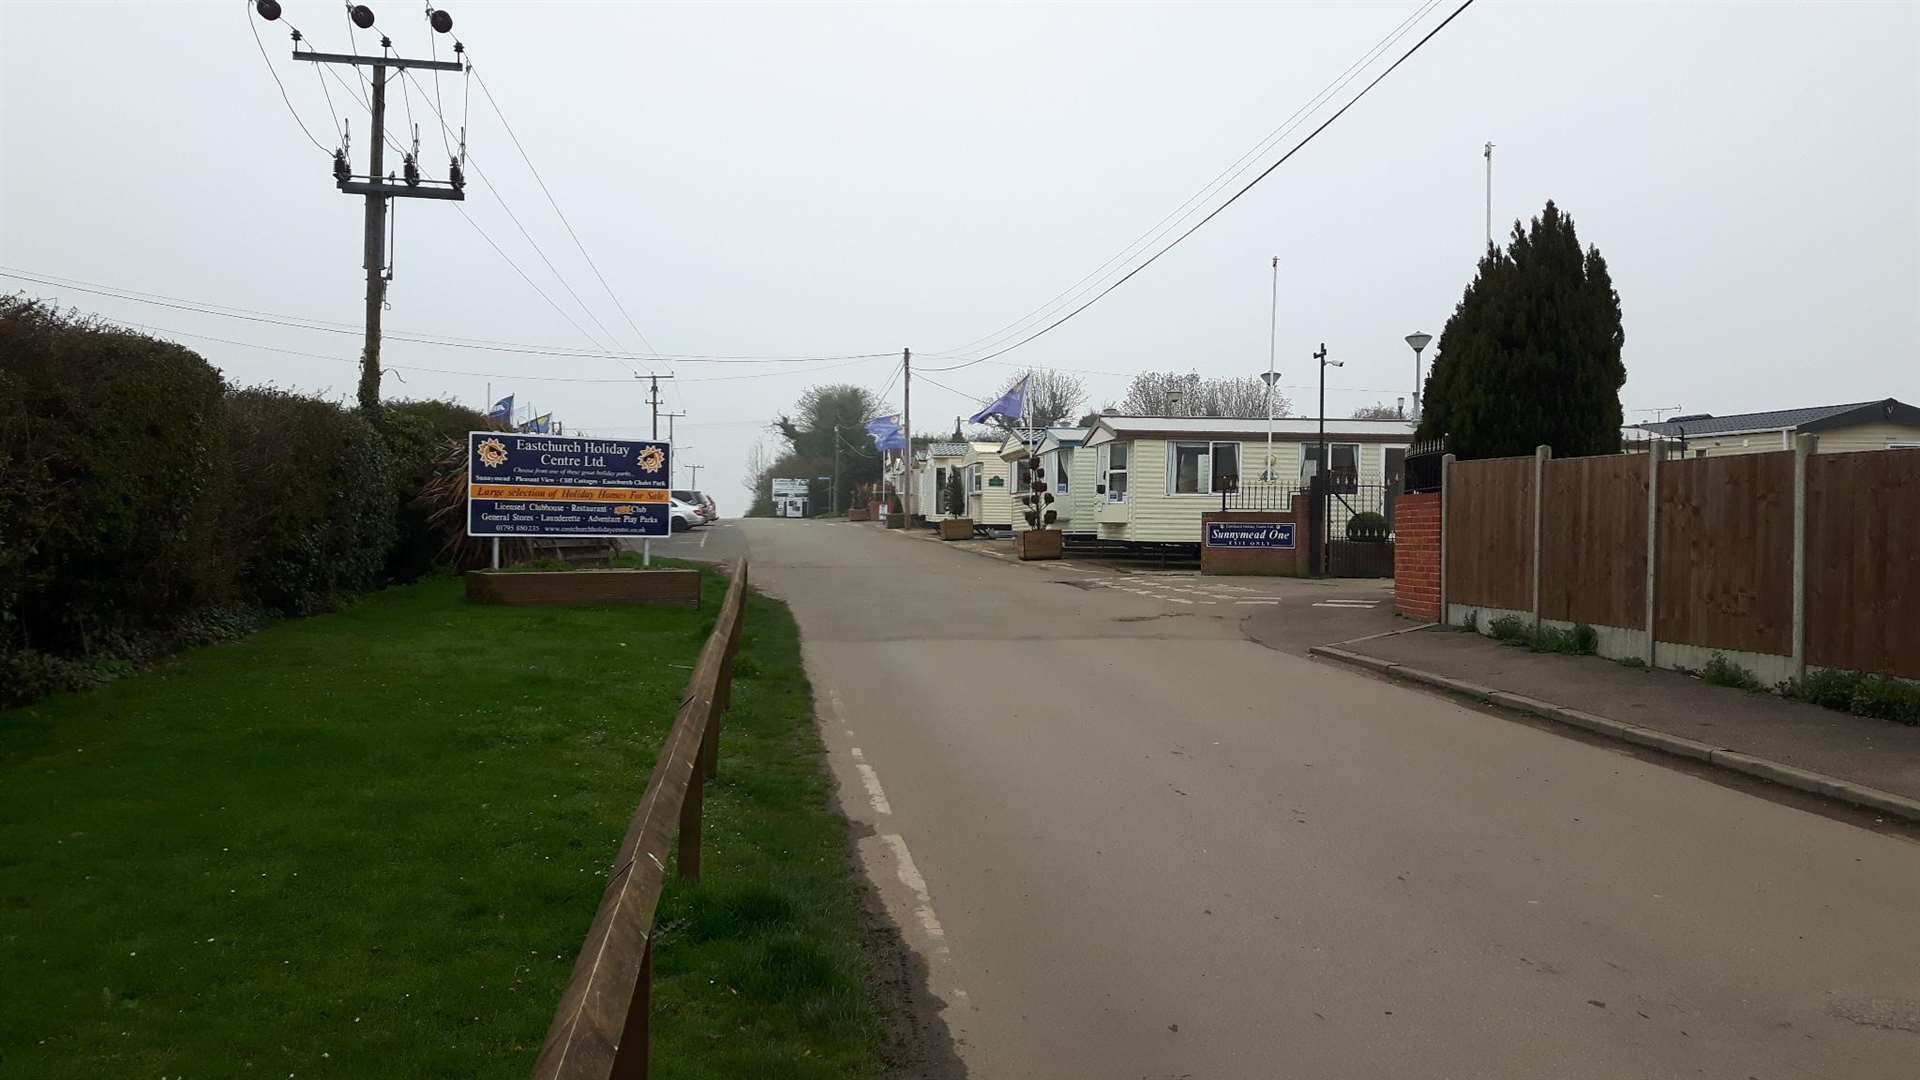 Eastchurch Holiday Centre on the Isle of Sheppey